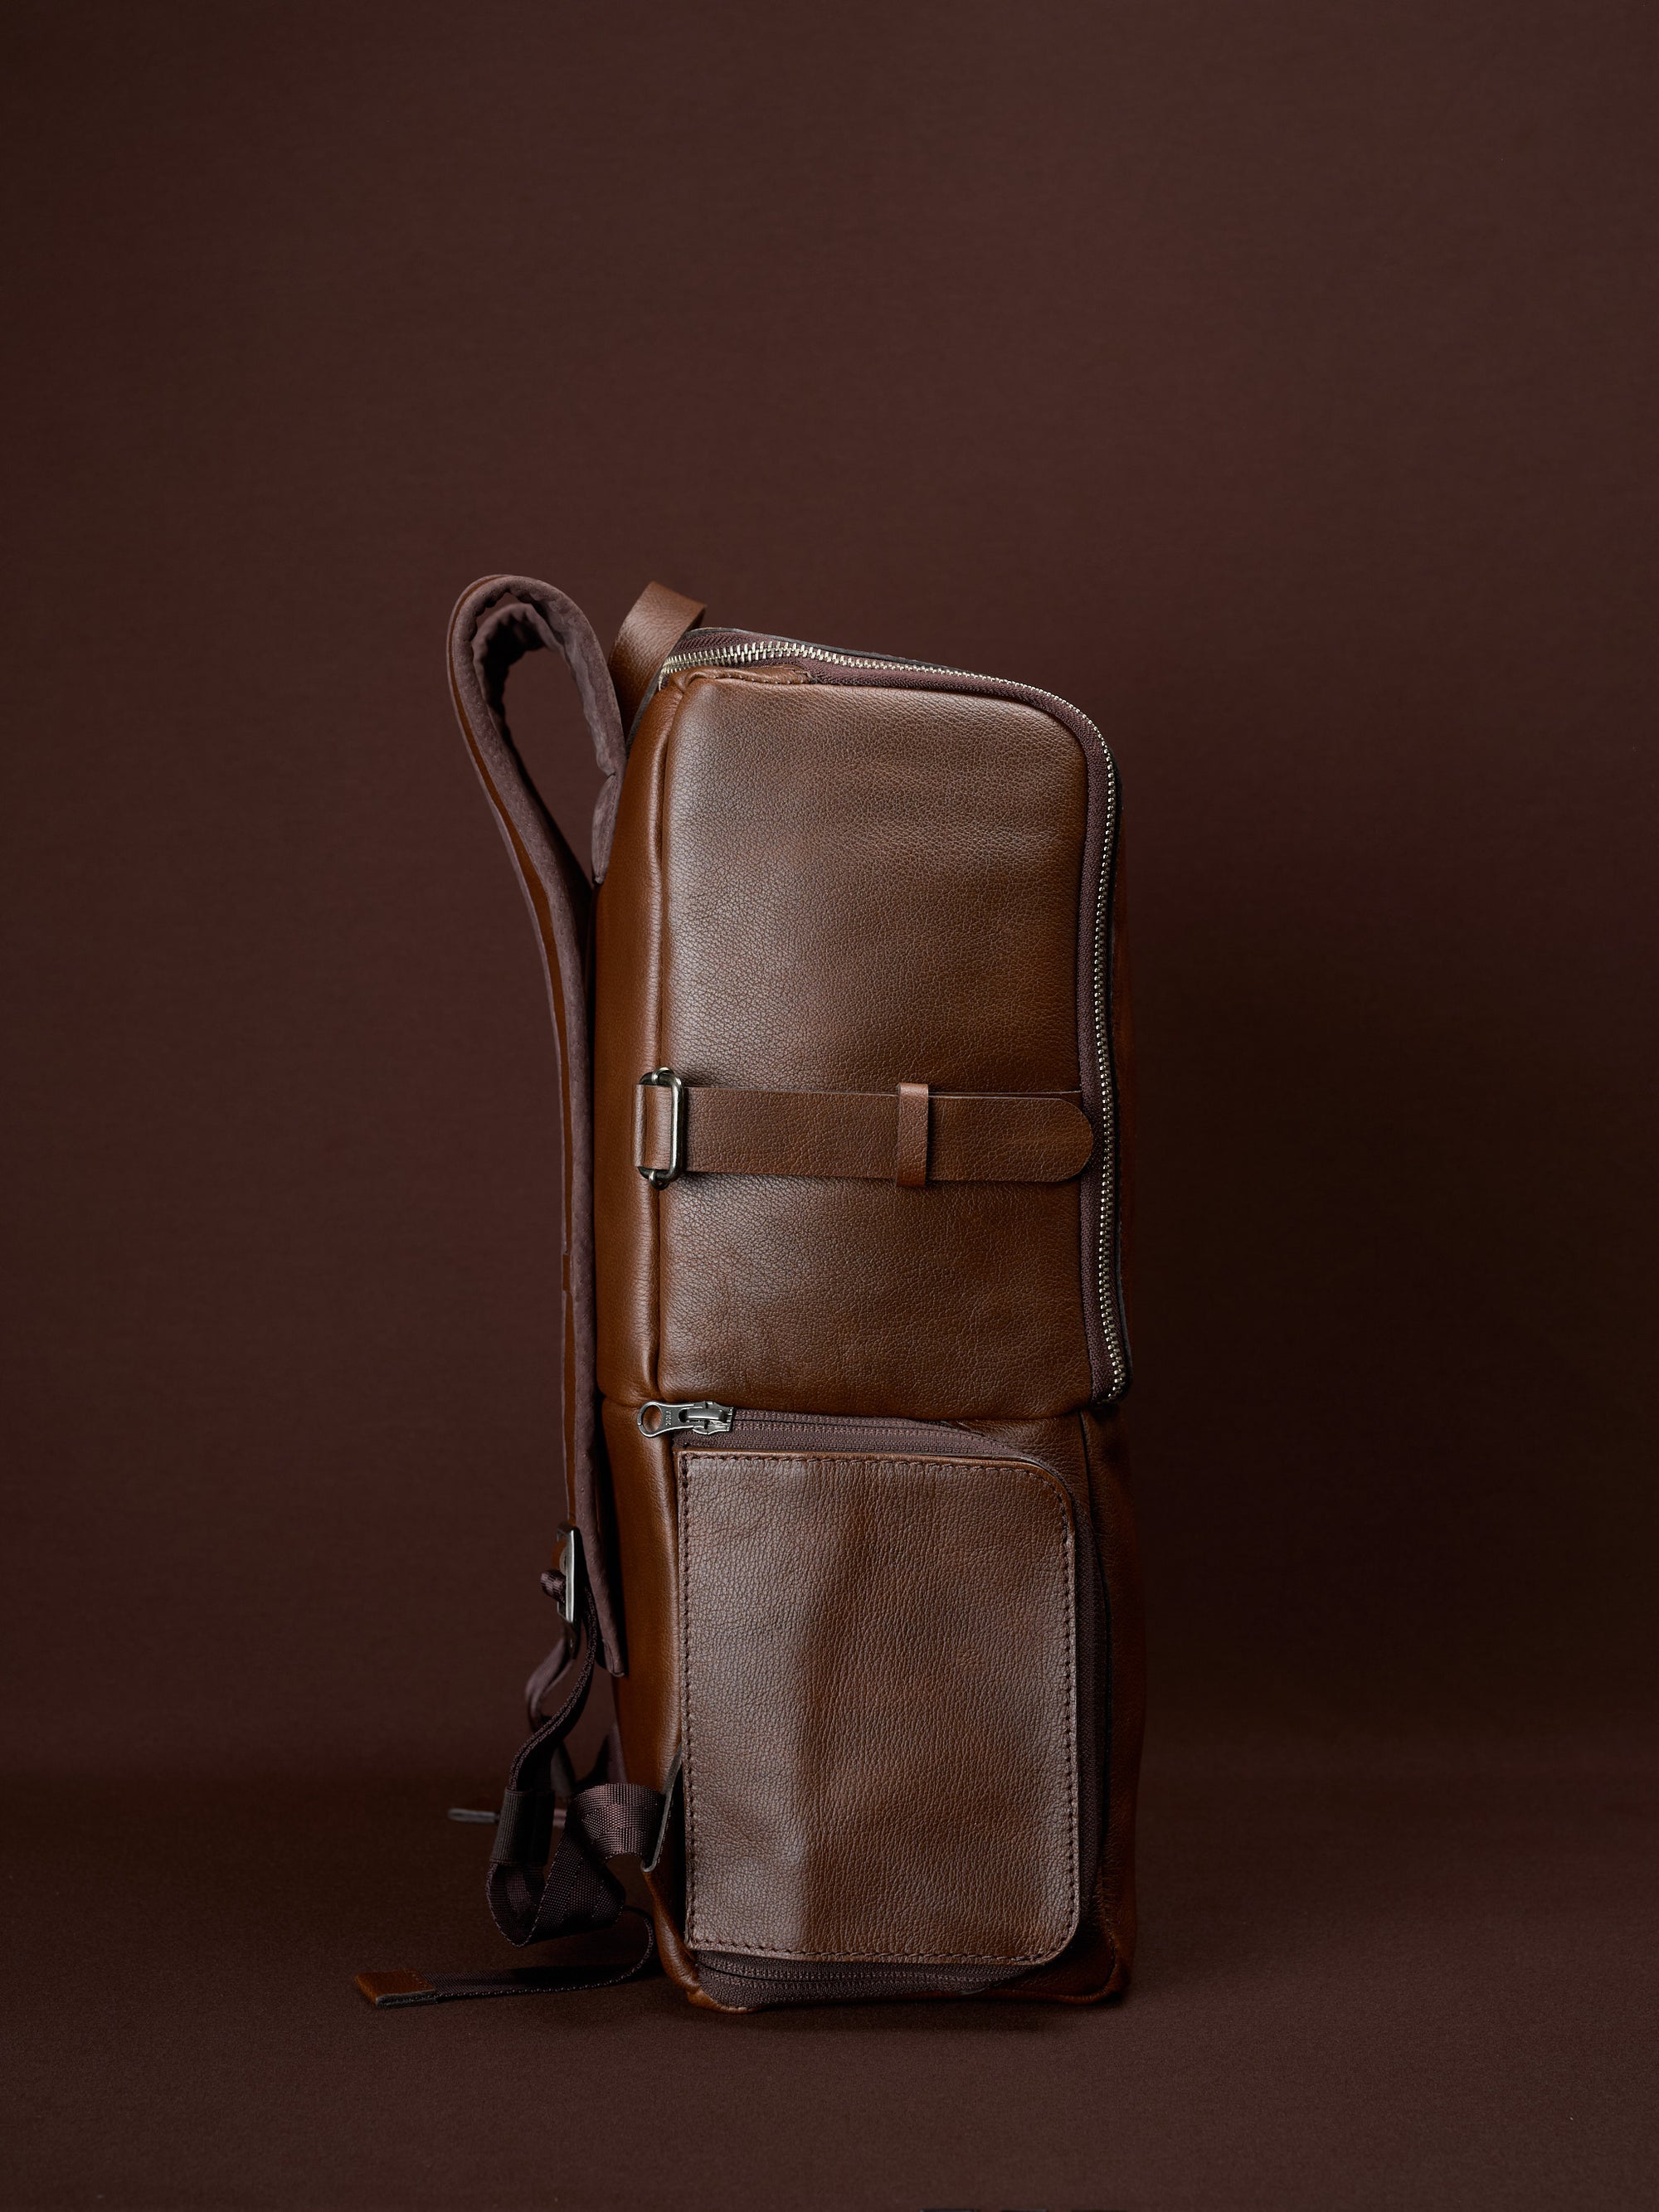 backpack for camera brown by capra leather